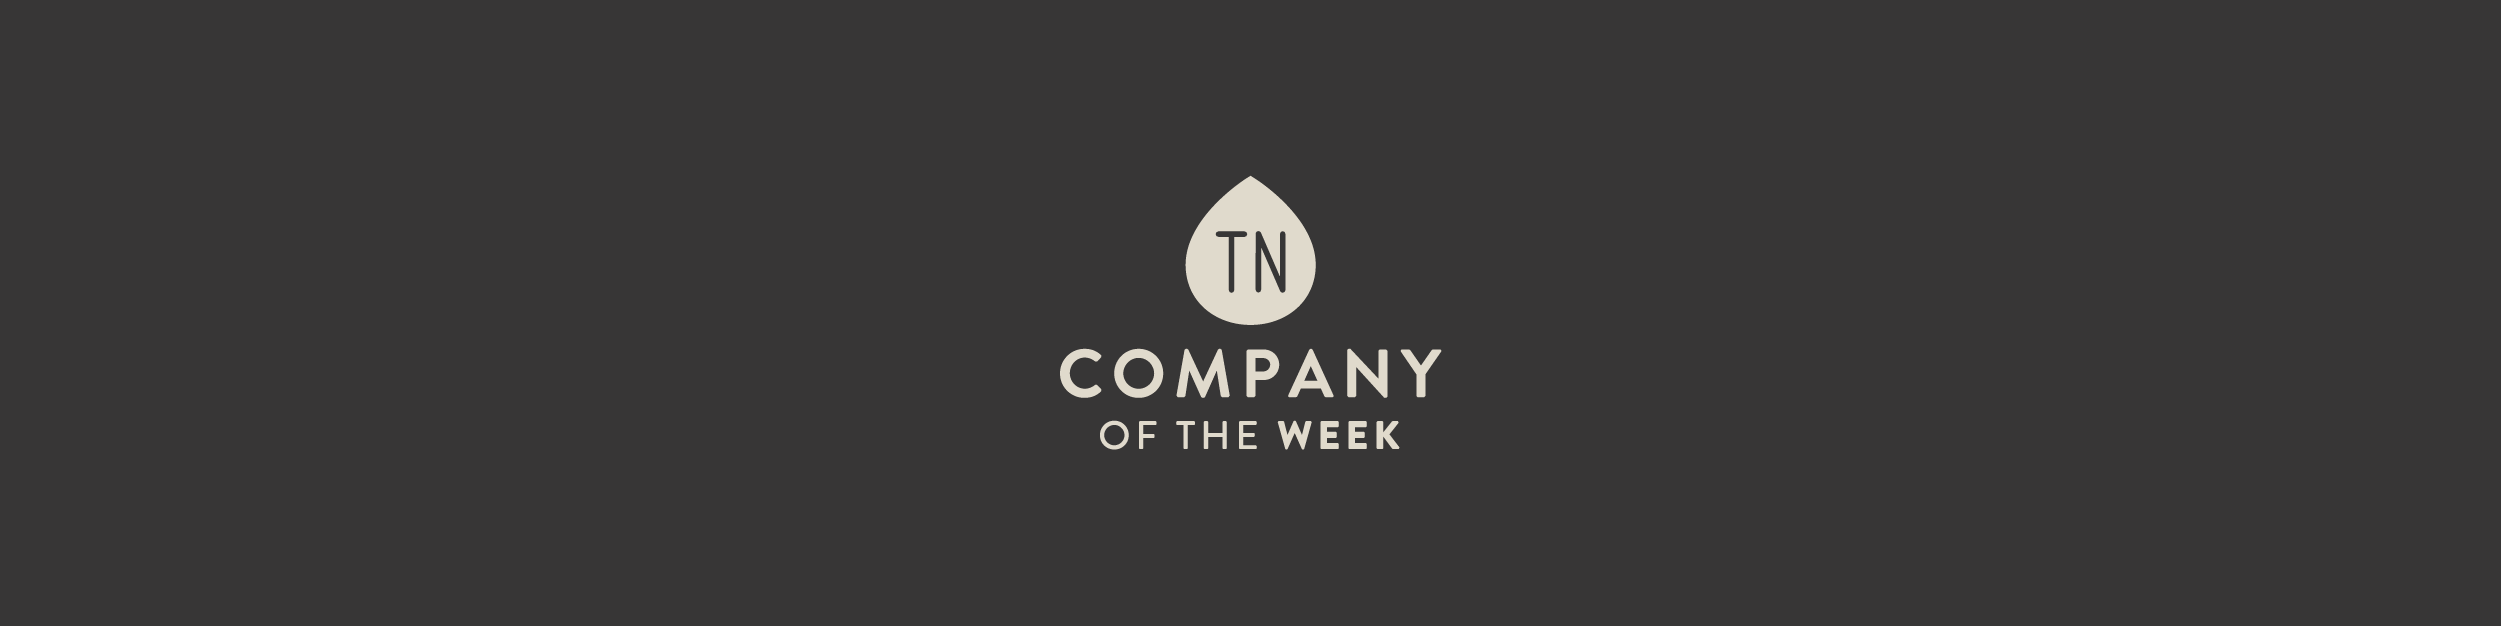 Company of the week